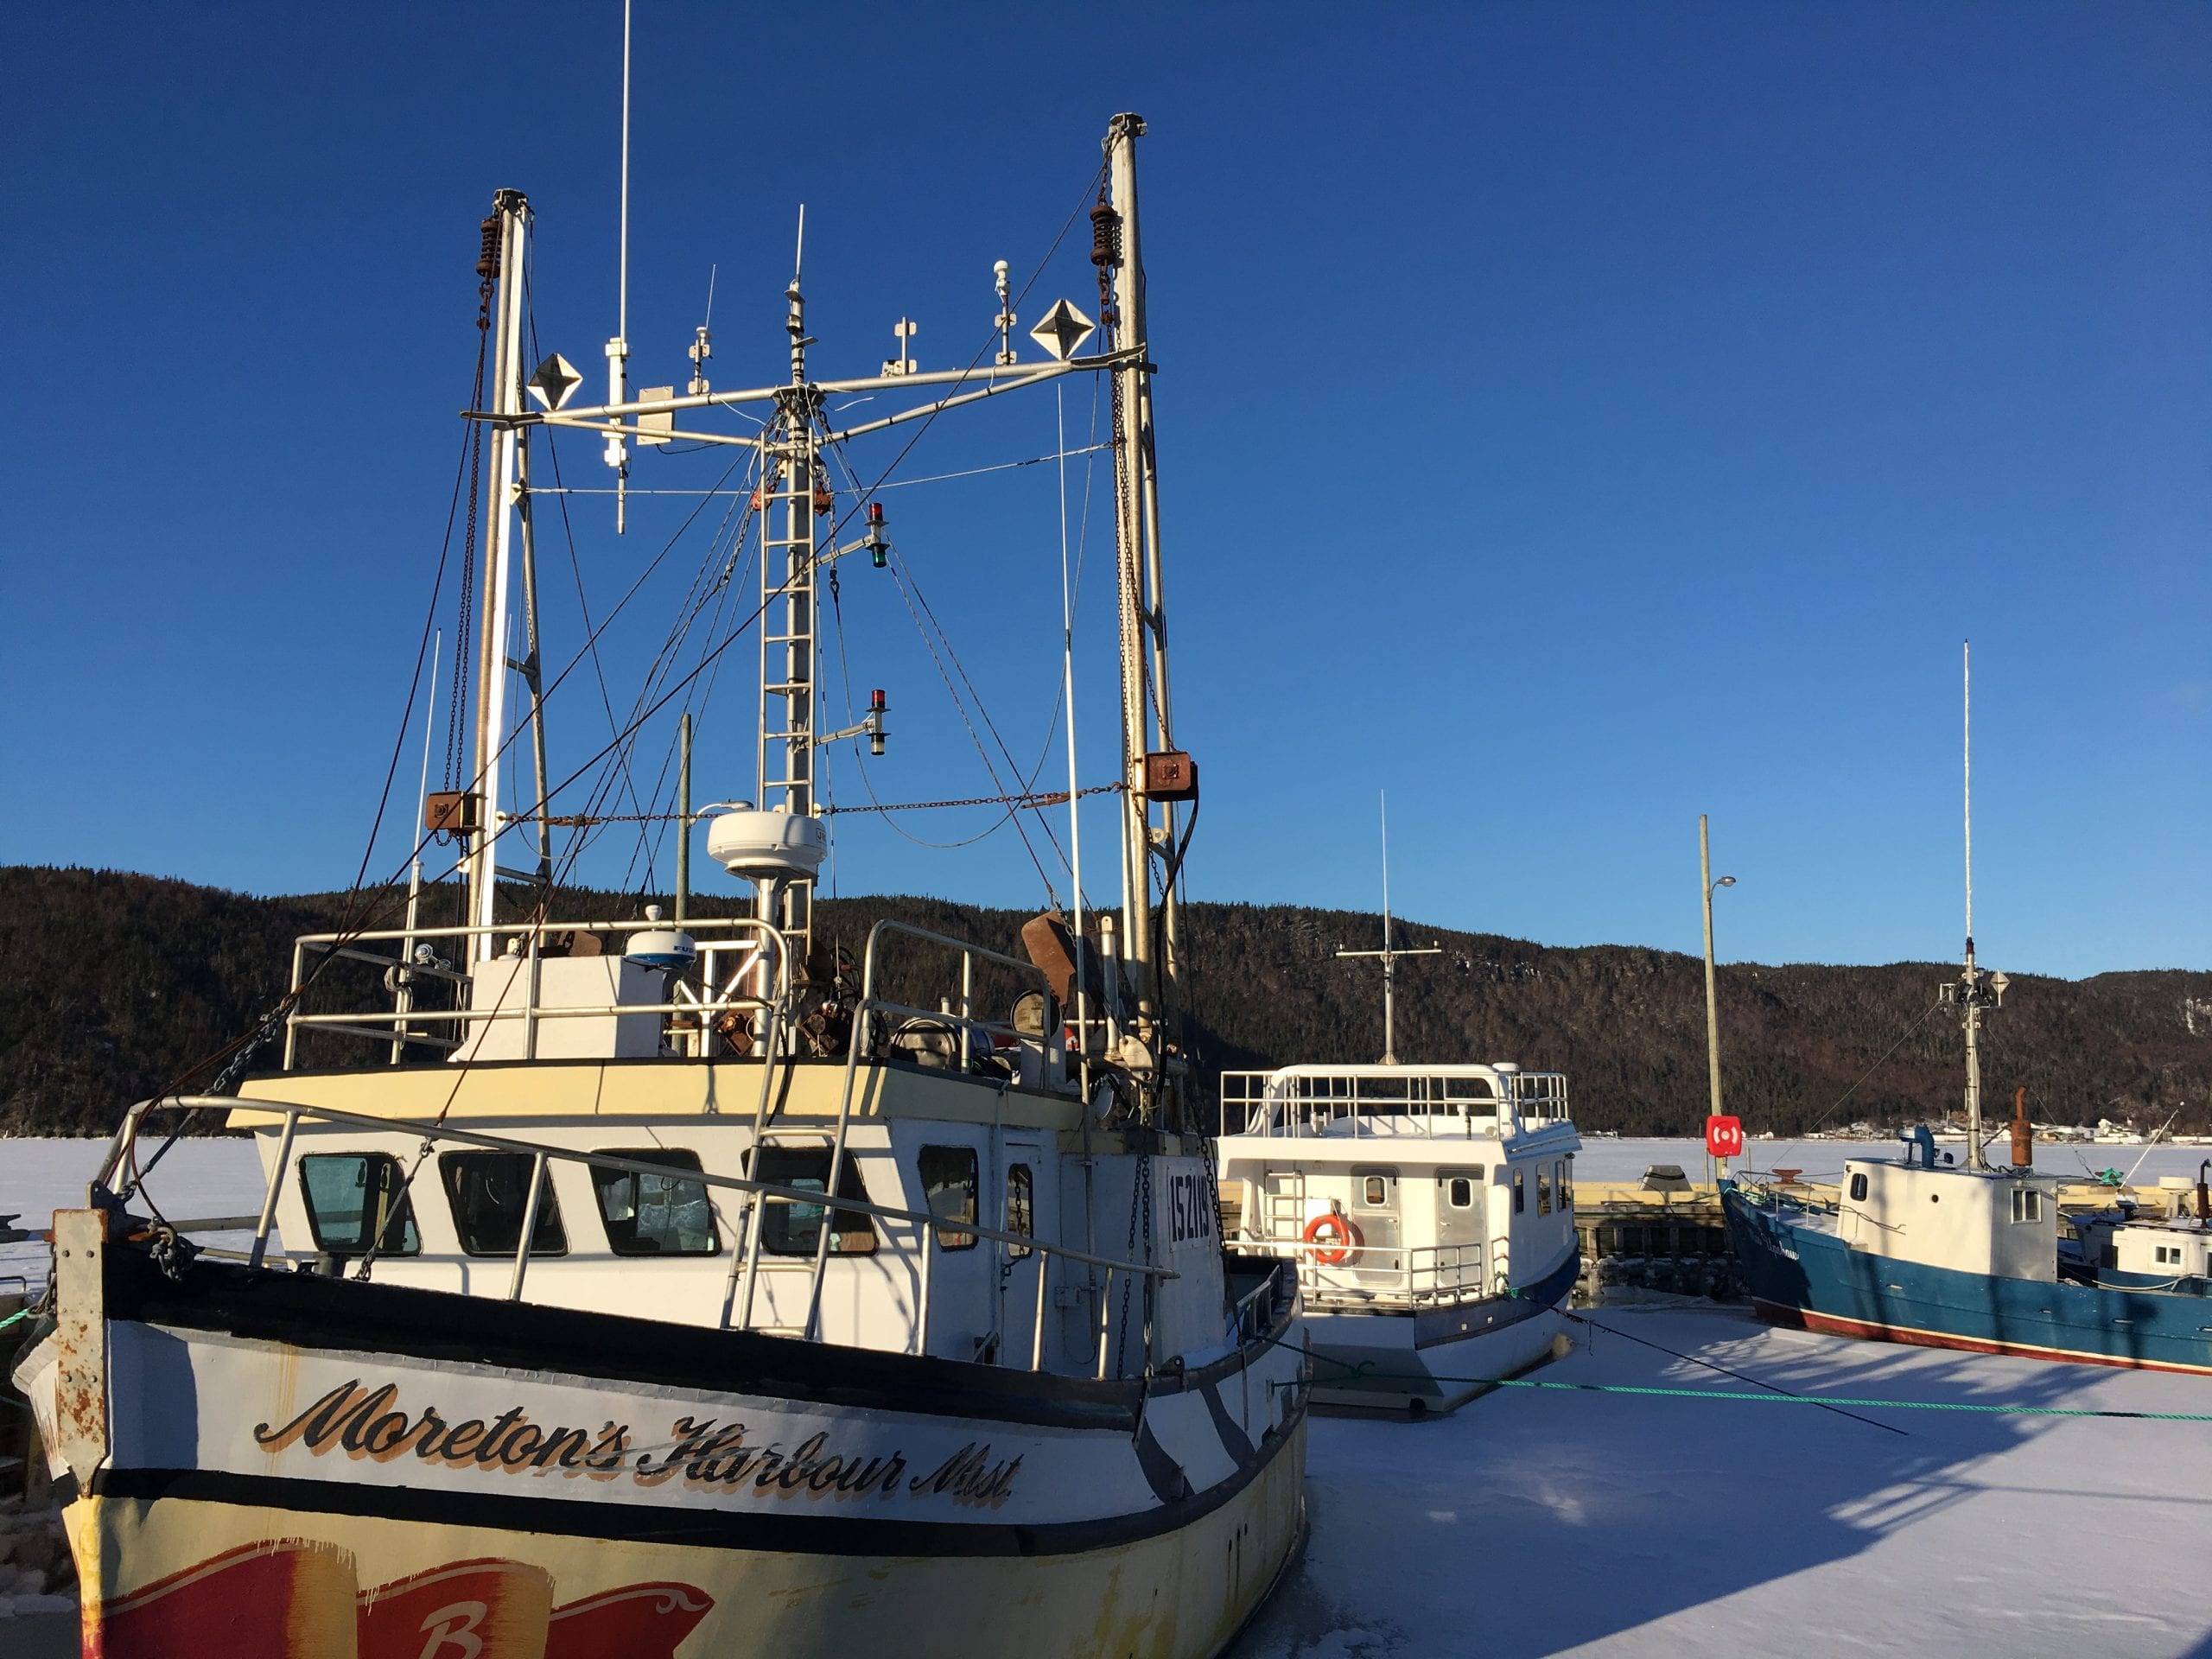 Fishing boats at the dock in the Miawpukek First Nation at Conne River, NL  - APTN News